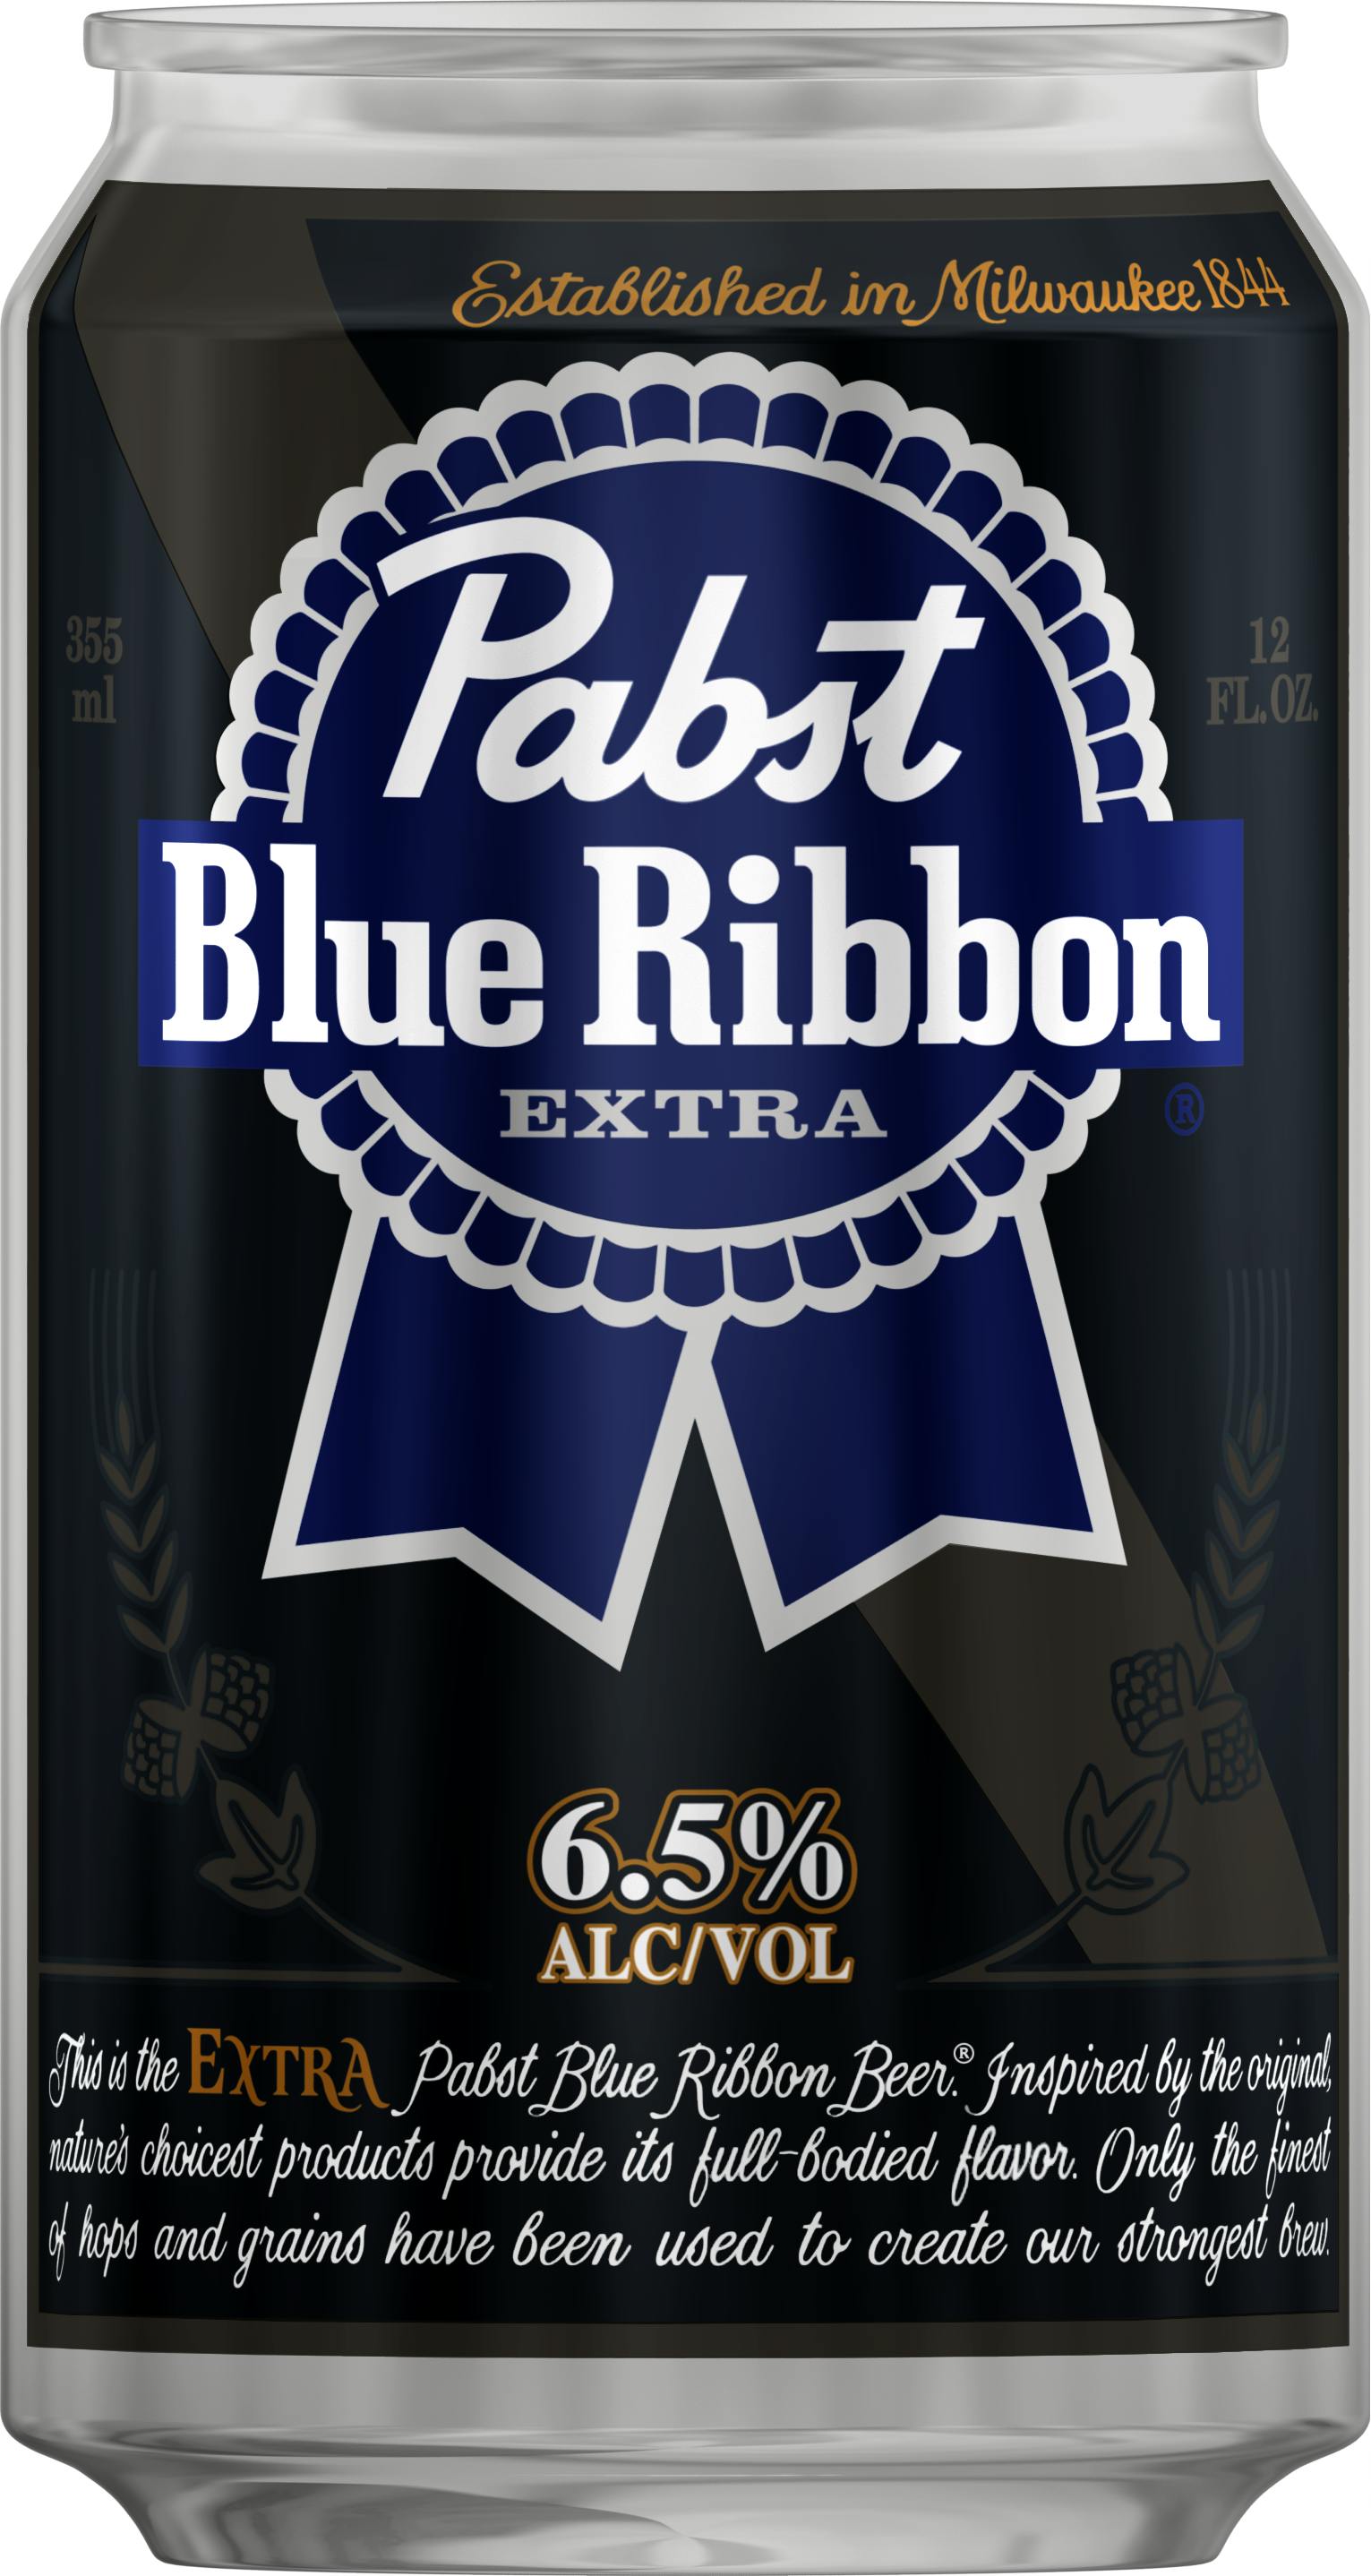 NEW 16 oz FREE SHIPPING in USA 2019 PBRART Pabst Blue Ribbon Beer Can 852918 